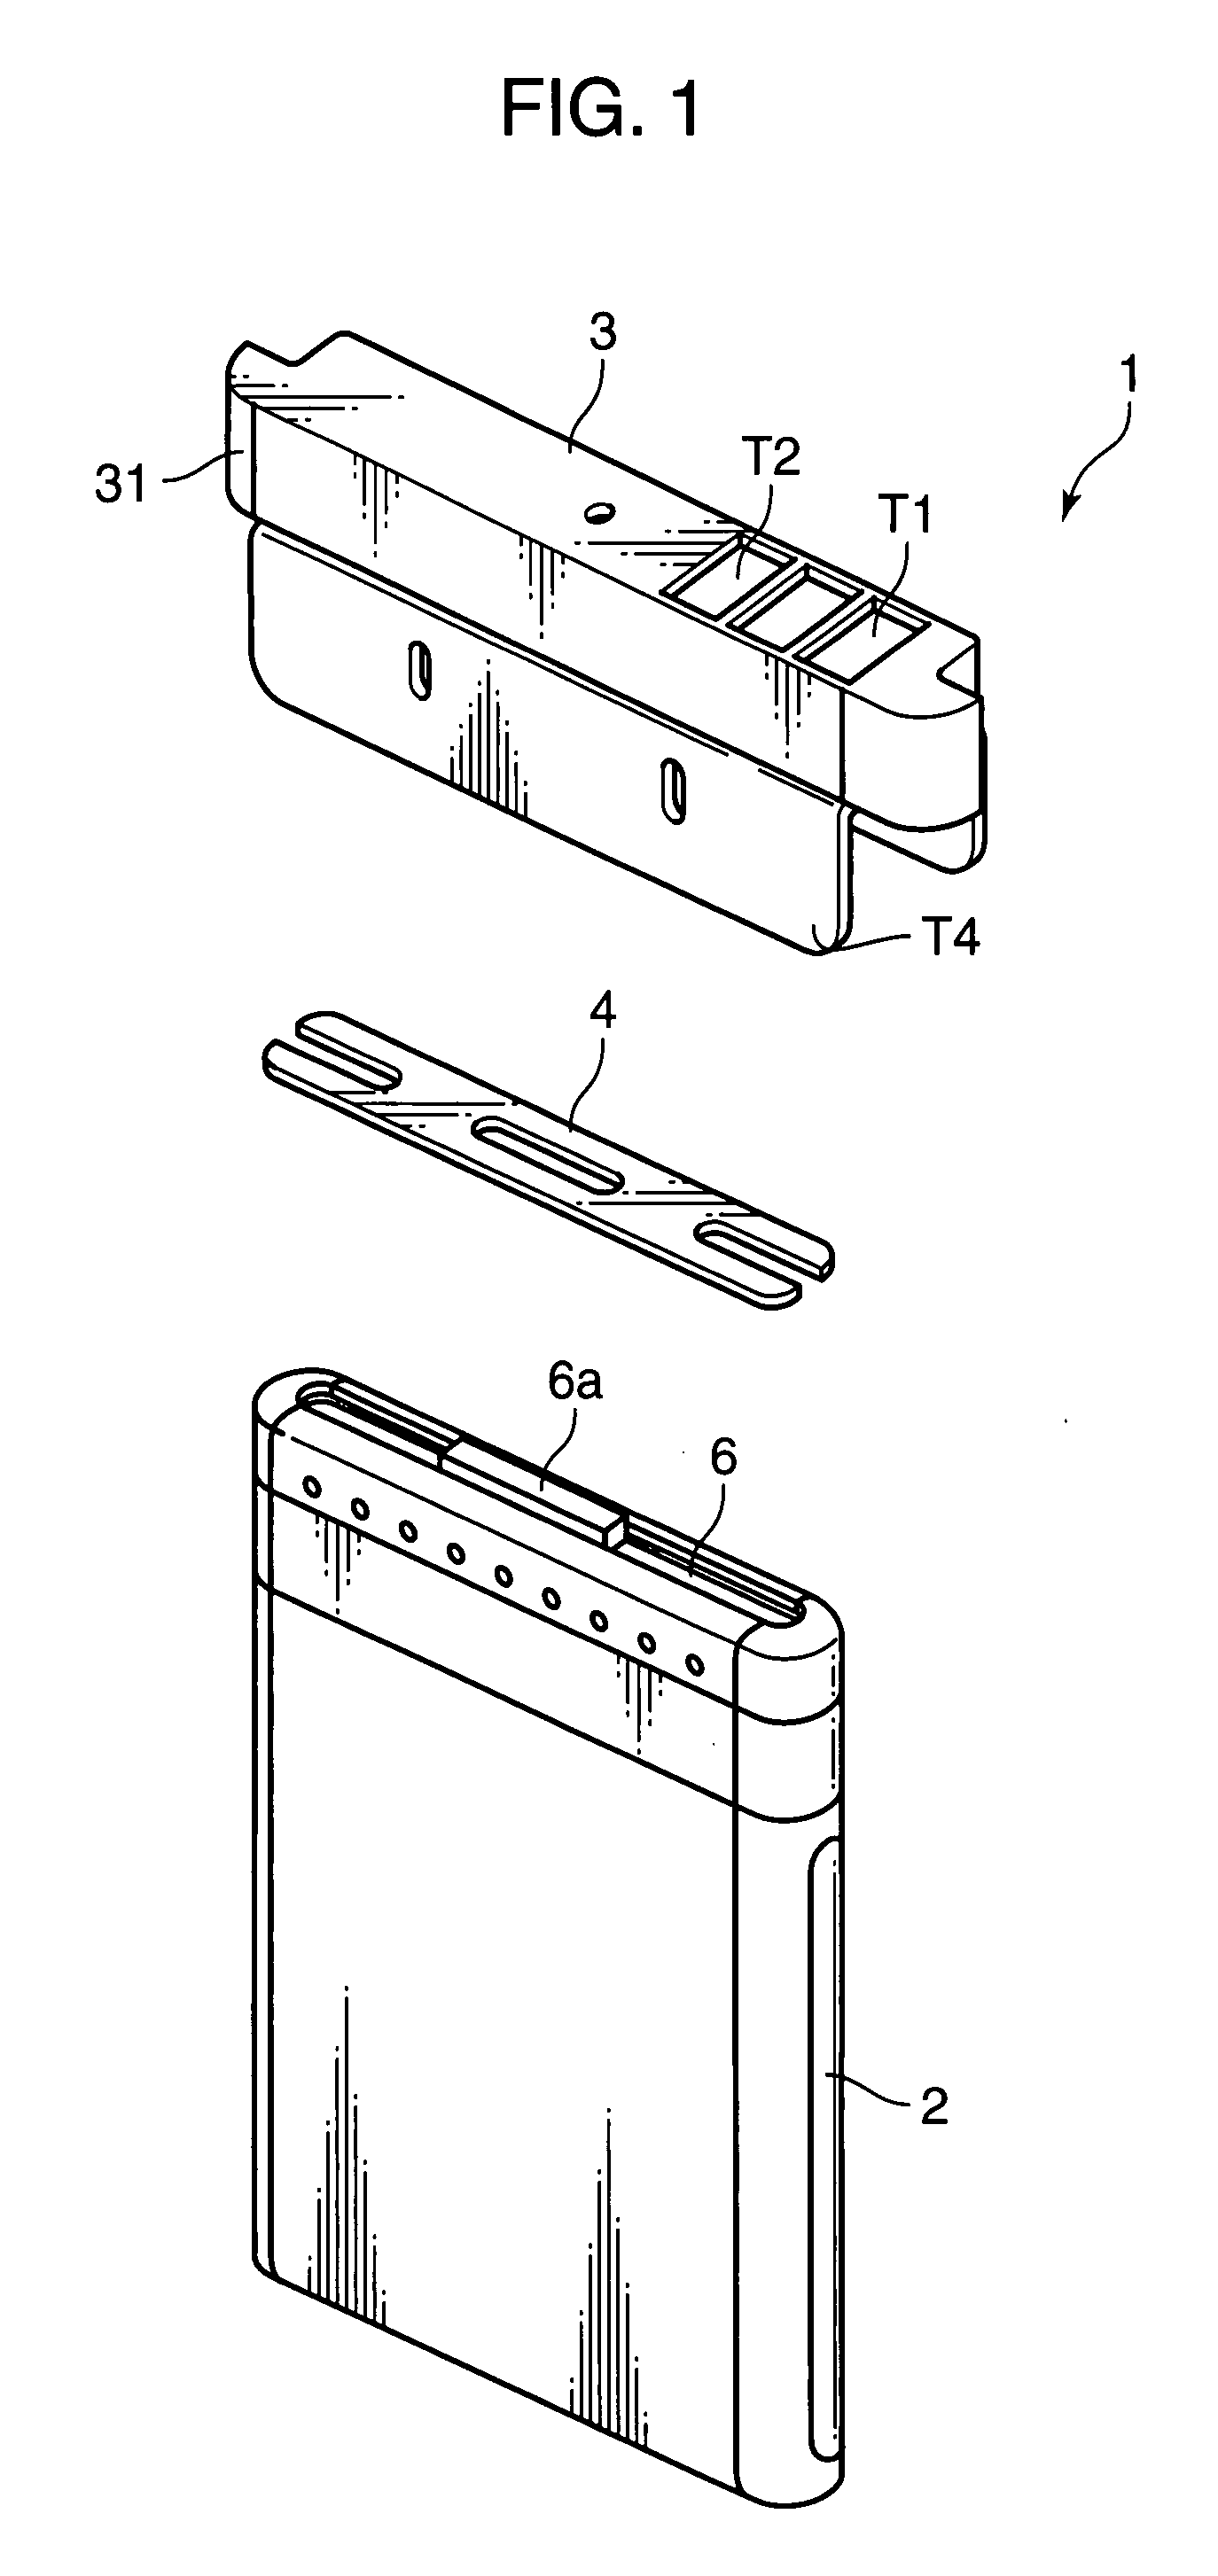 Secondary battery protection circuit, battery pack and thermosensitive protection switch device